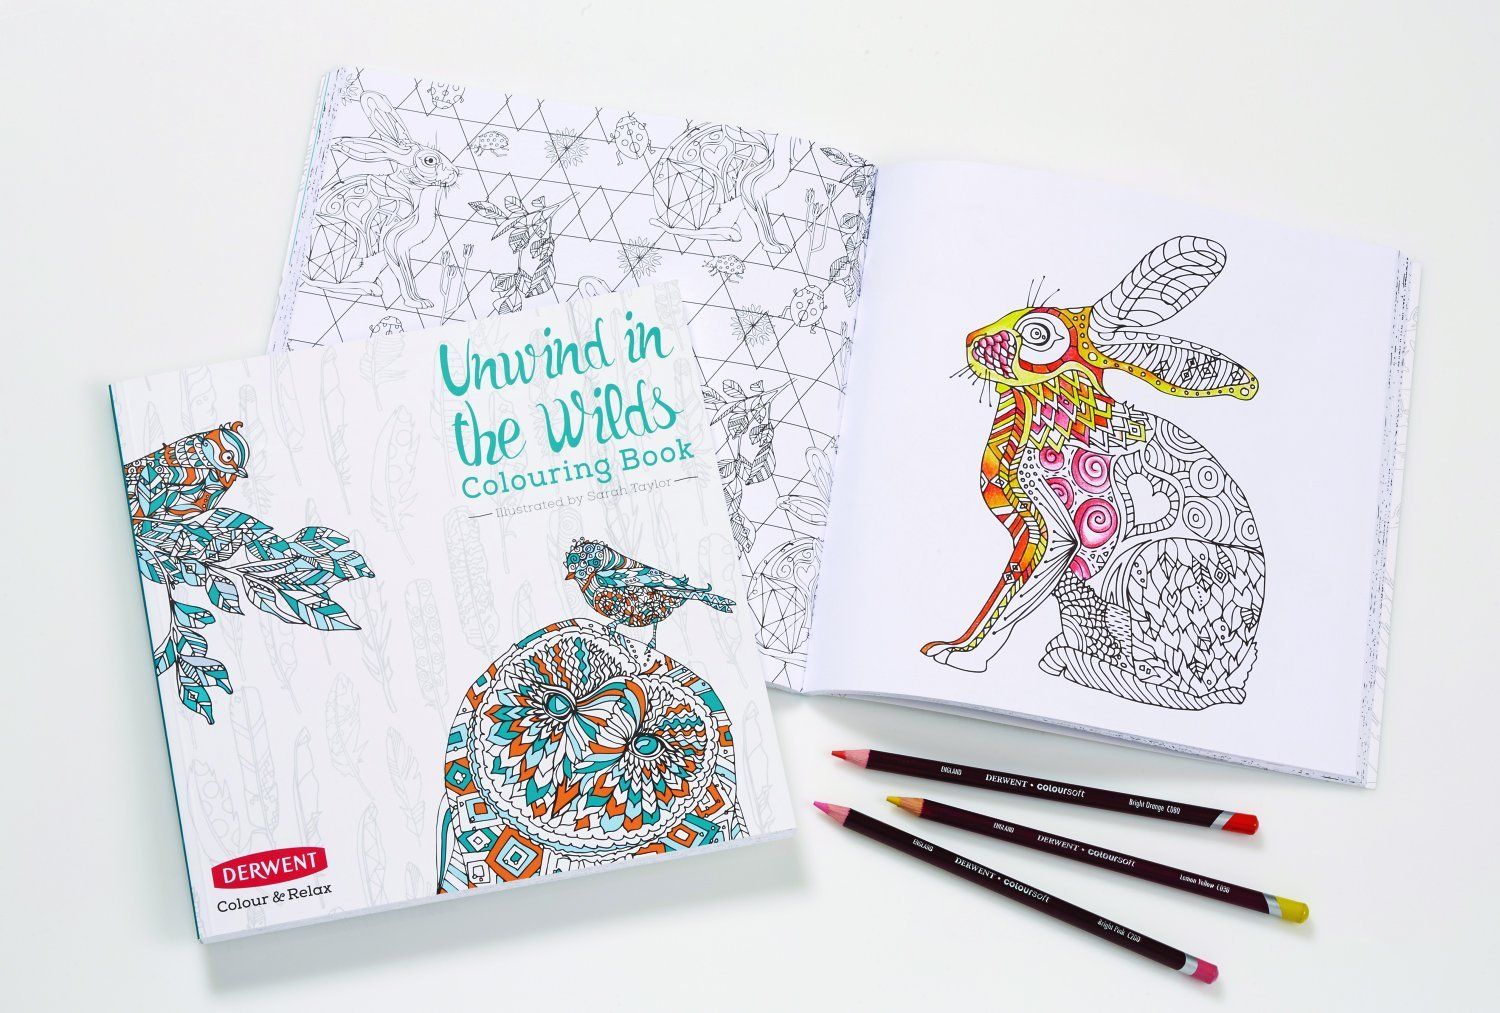 Derwent Unwind in The Wilds Colouring Book with 10 Coloursoft Pencils